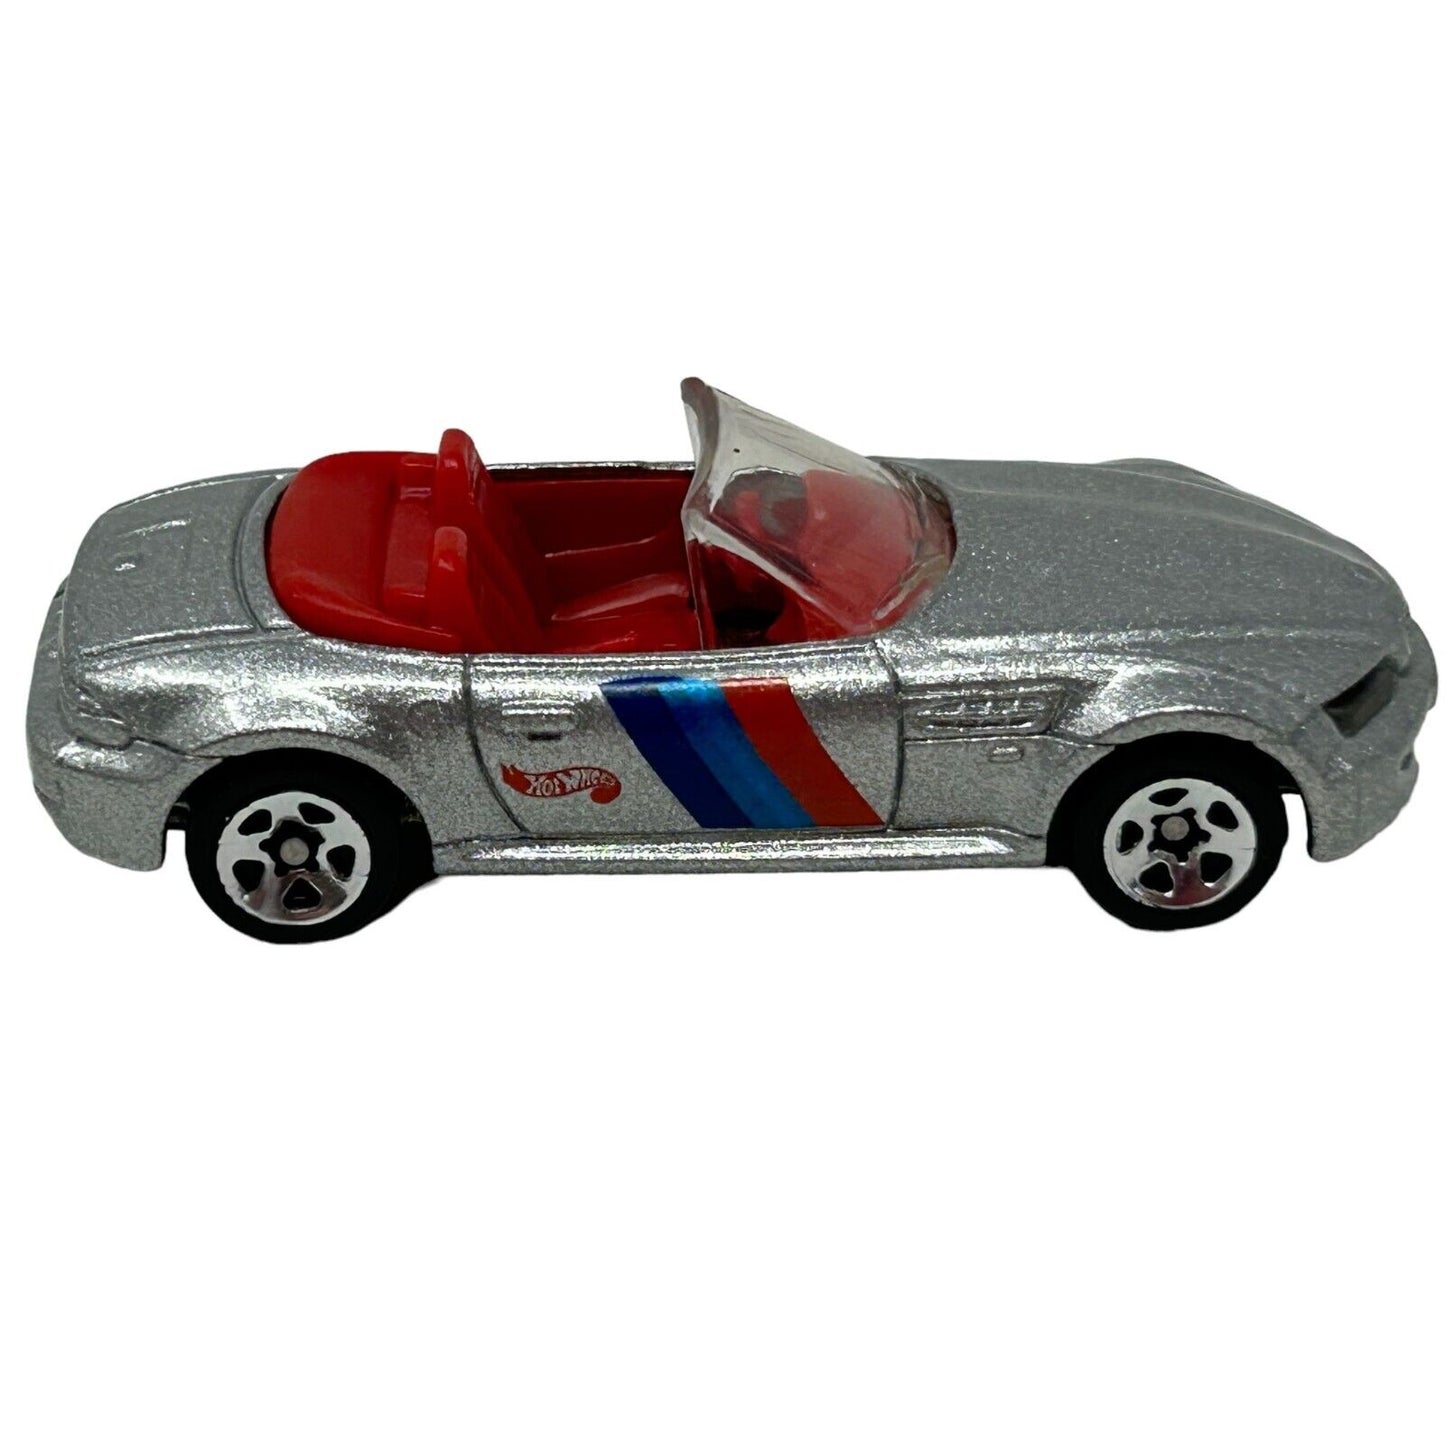 BMW M Roadster Hot Wheels Collectible Diecast Car Silver Convertible Vintage 90s